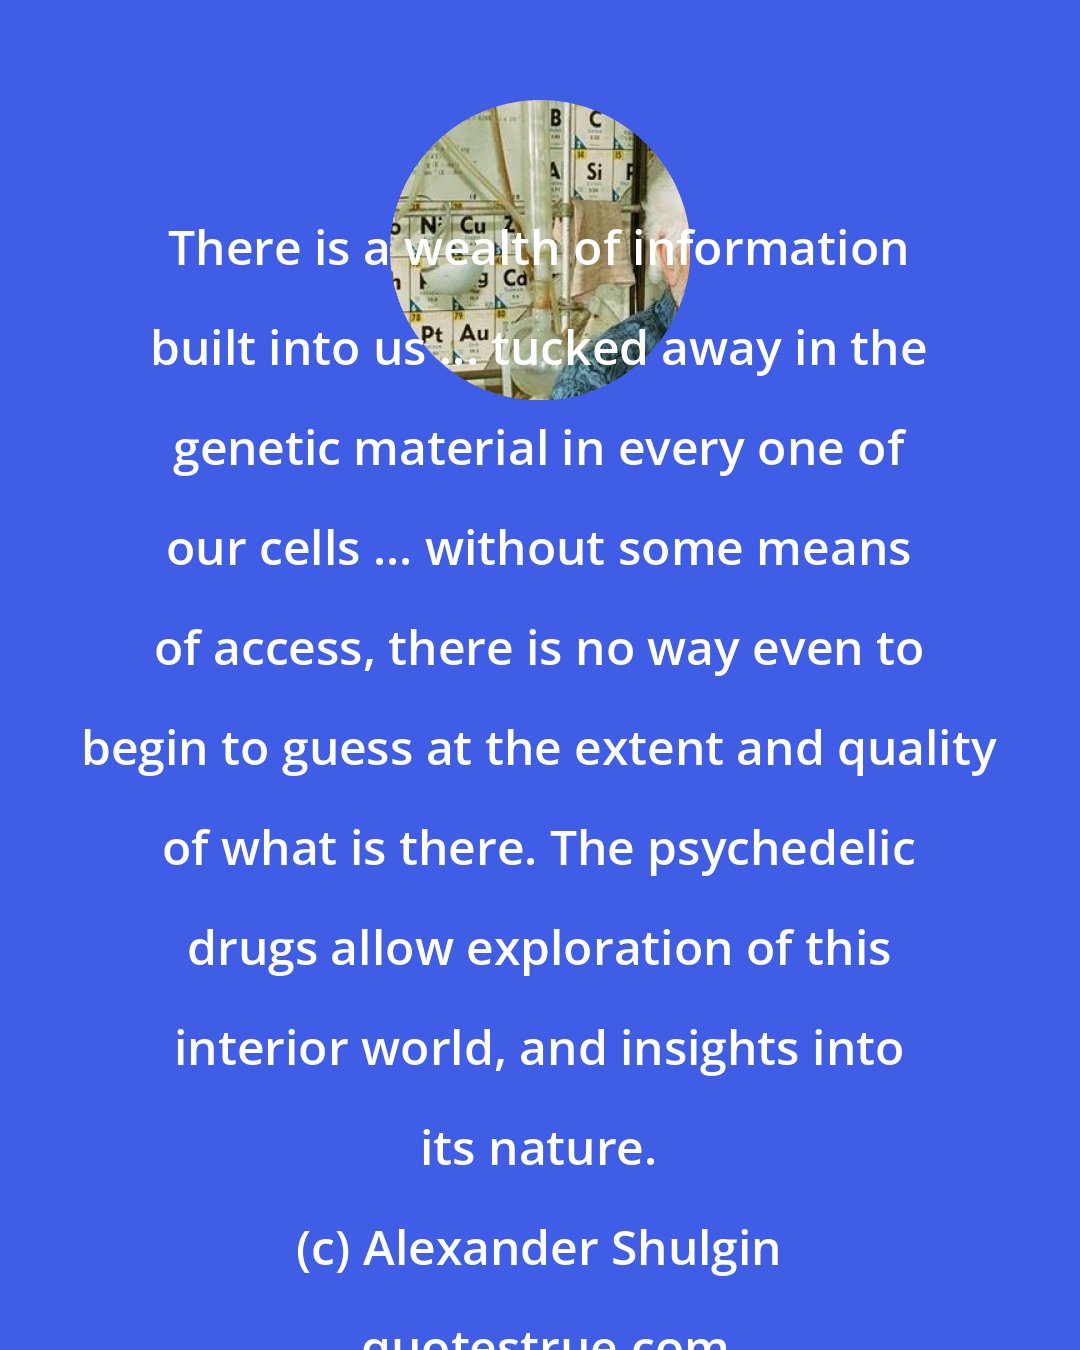 Alexander Shulgin: There is a wealth of information built into us ... tucked away in the genetic material in every one of our cells ... without some means of access, there is no way even to begin to guess at the extent and quality of what is there. The psychedelic drugs allow exploration of this interior world, and insights into its nature.